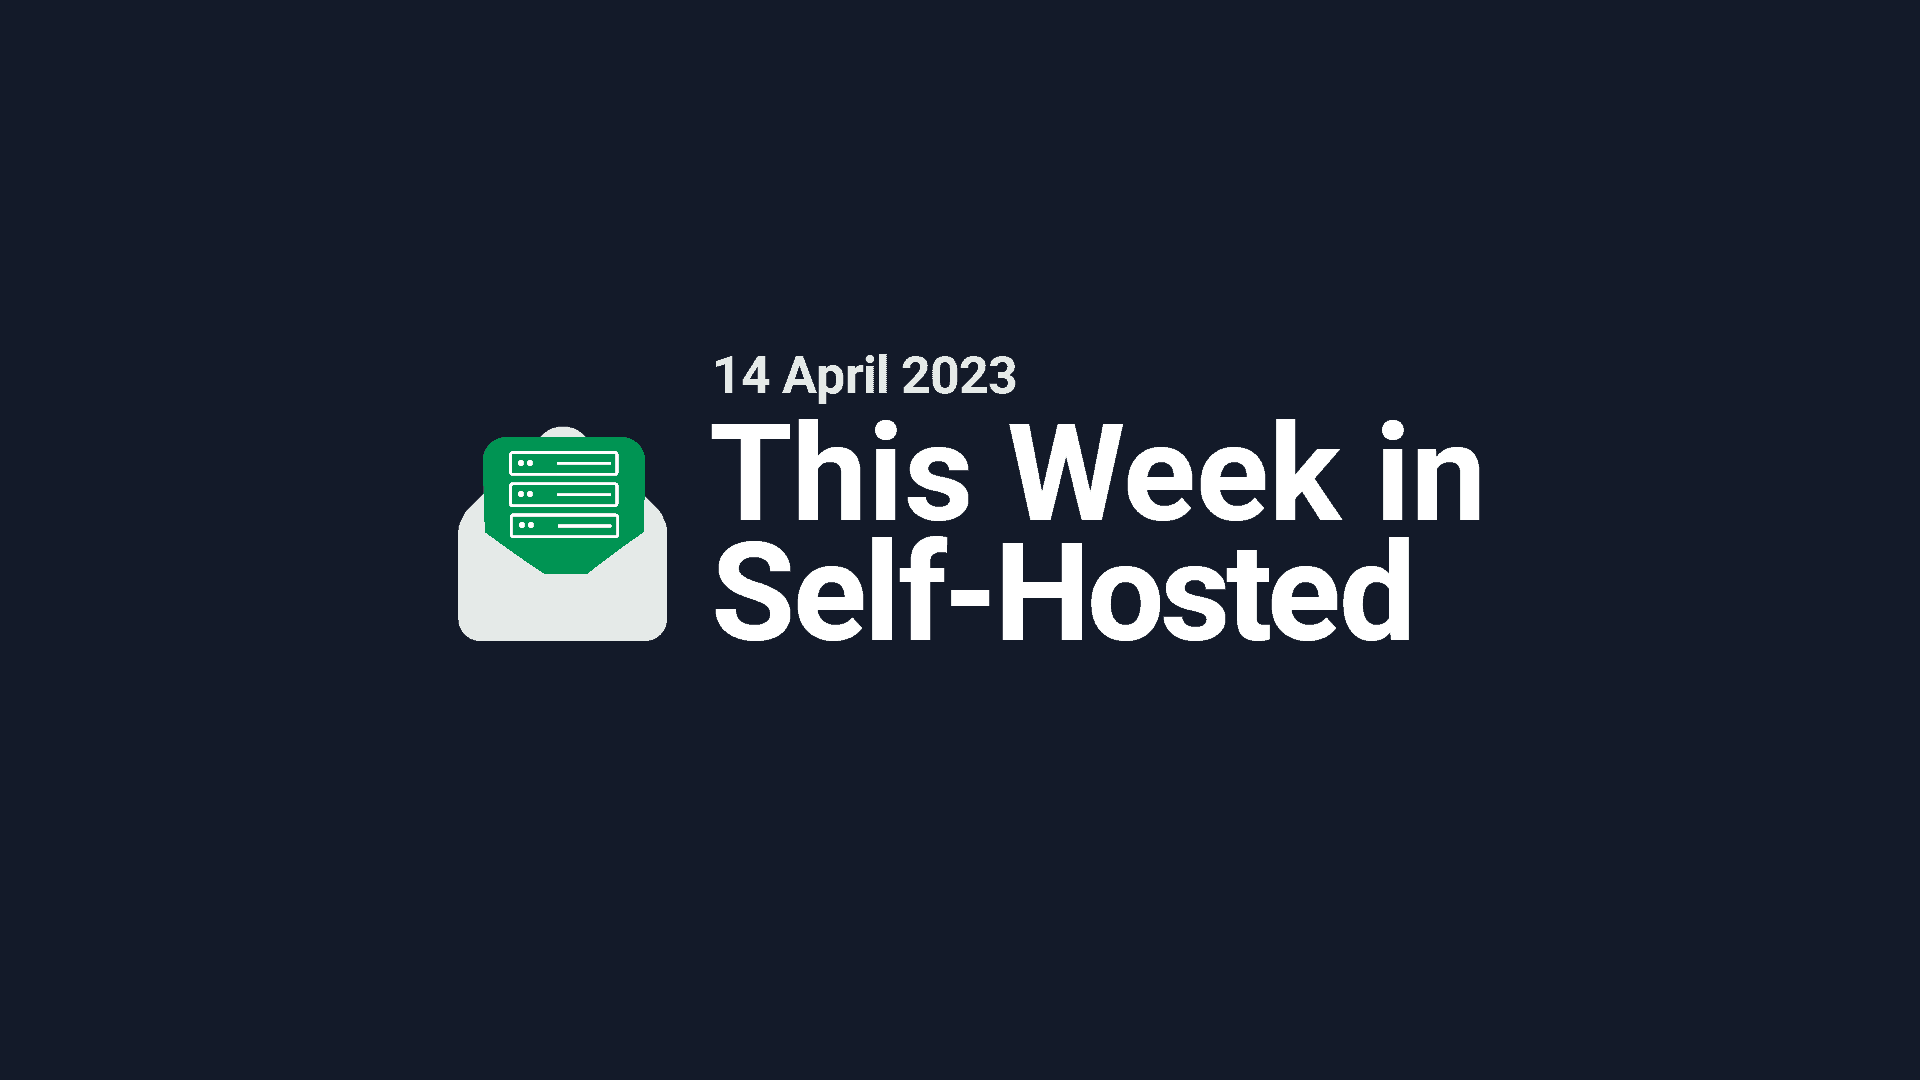 This Week in Self-Hosted (14 April 2023) Post image